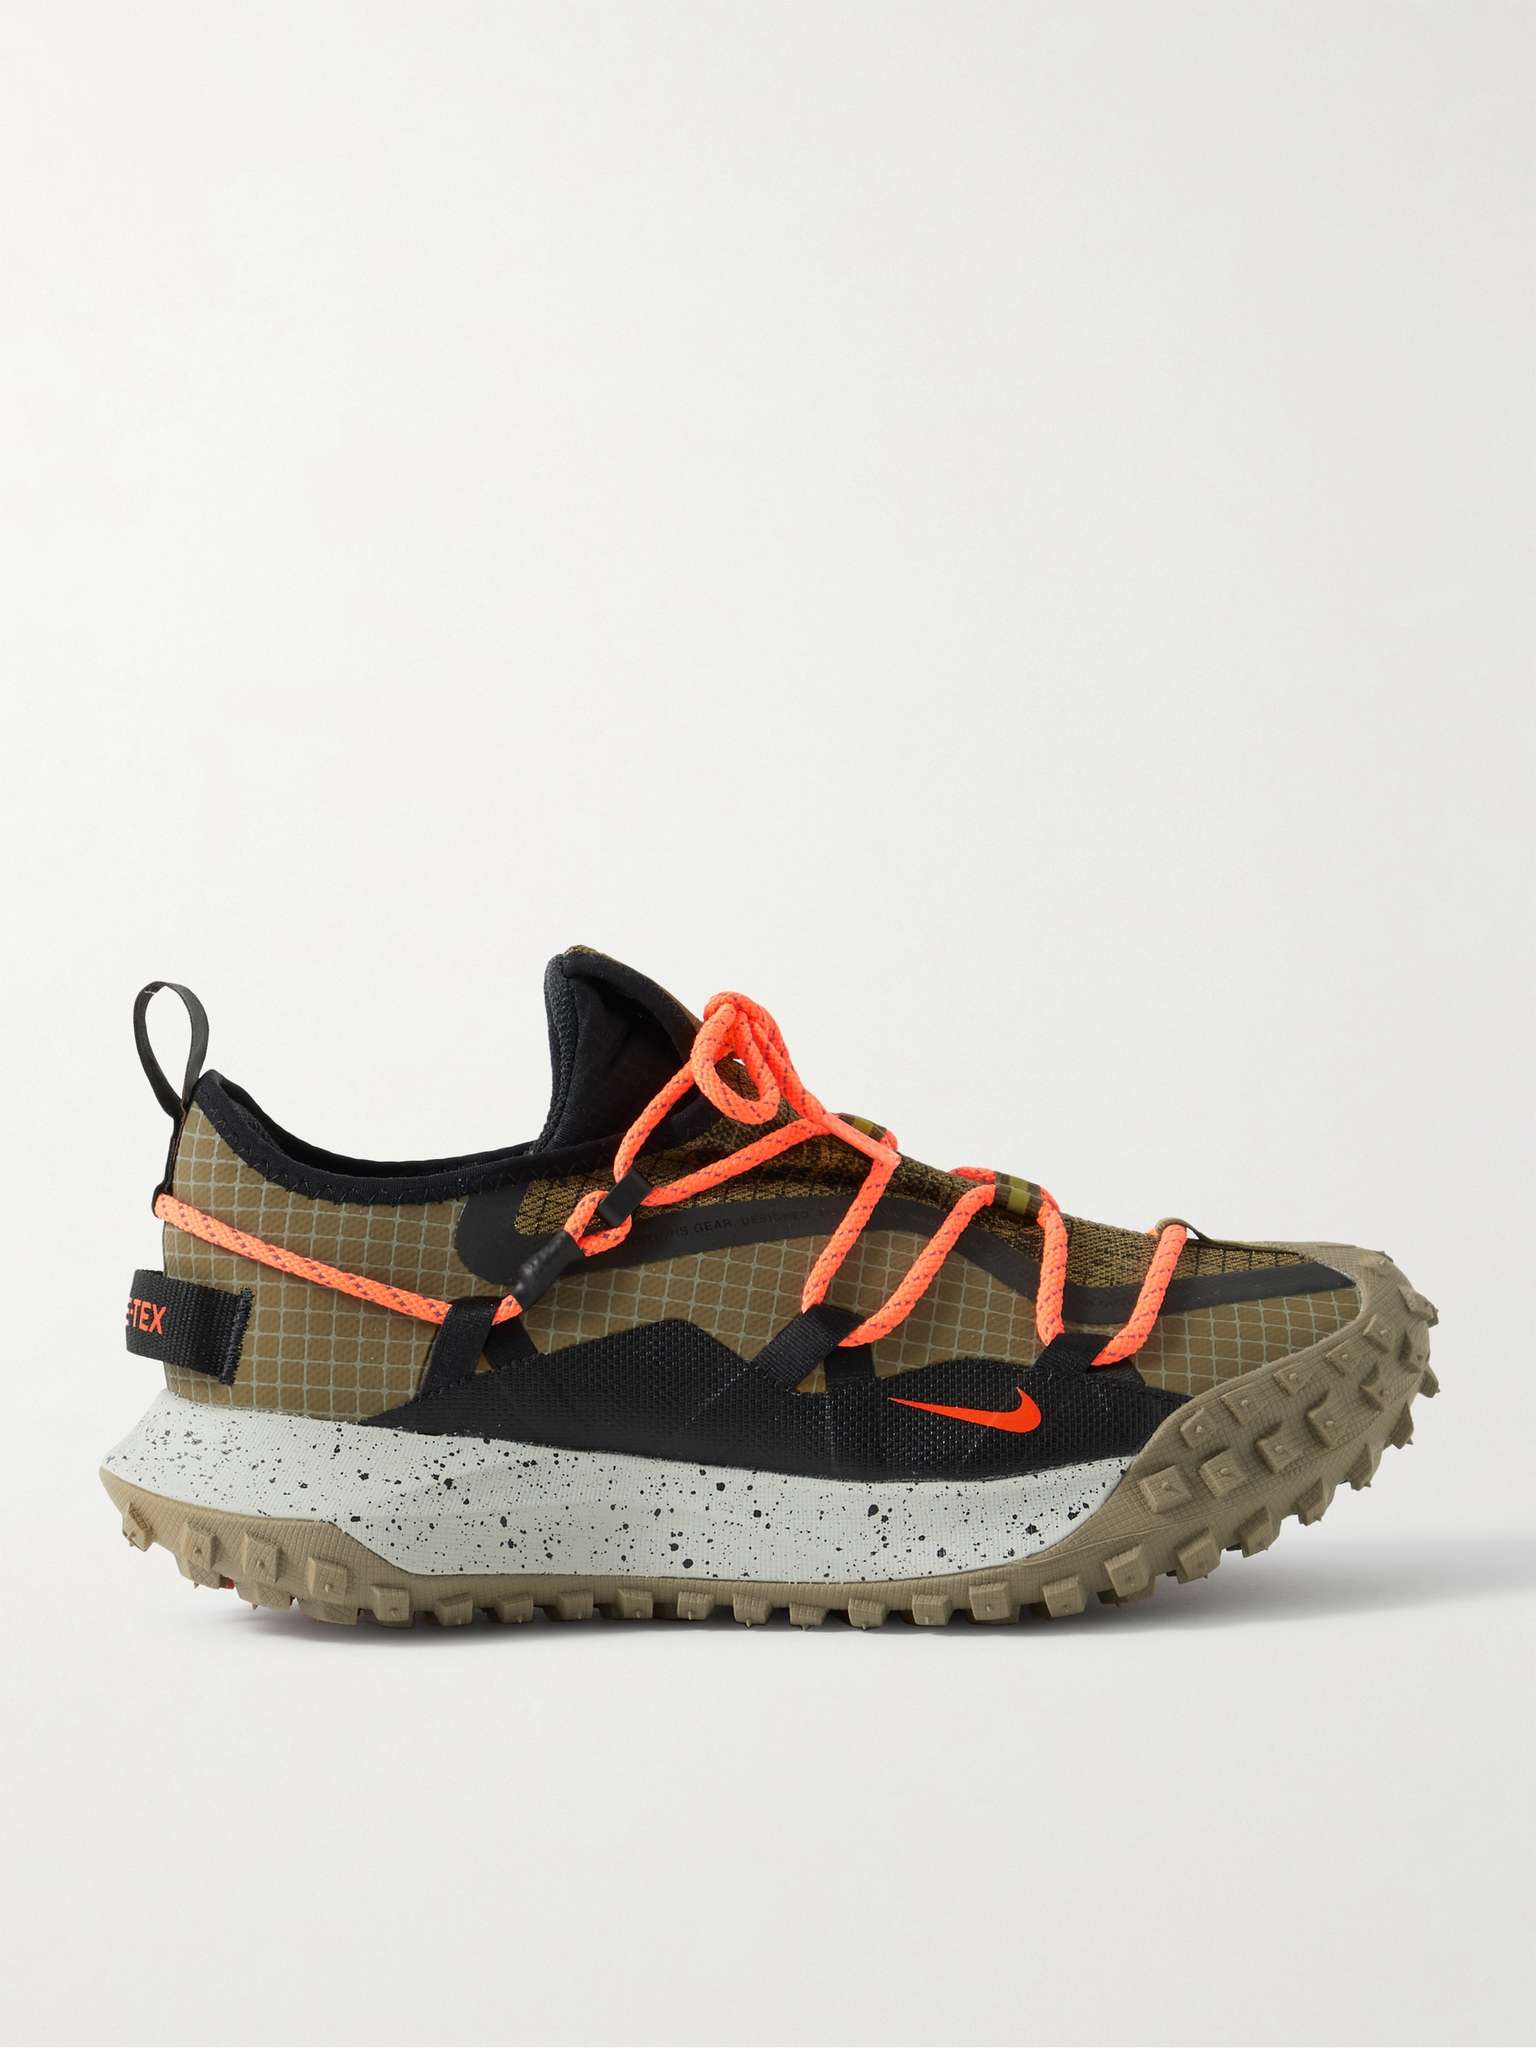 Unknown ACG Mountain Fly Rubber-Trimmed GORE-TEX Sneakers | NIKE | MR ...